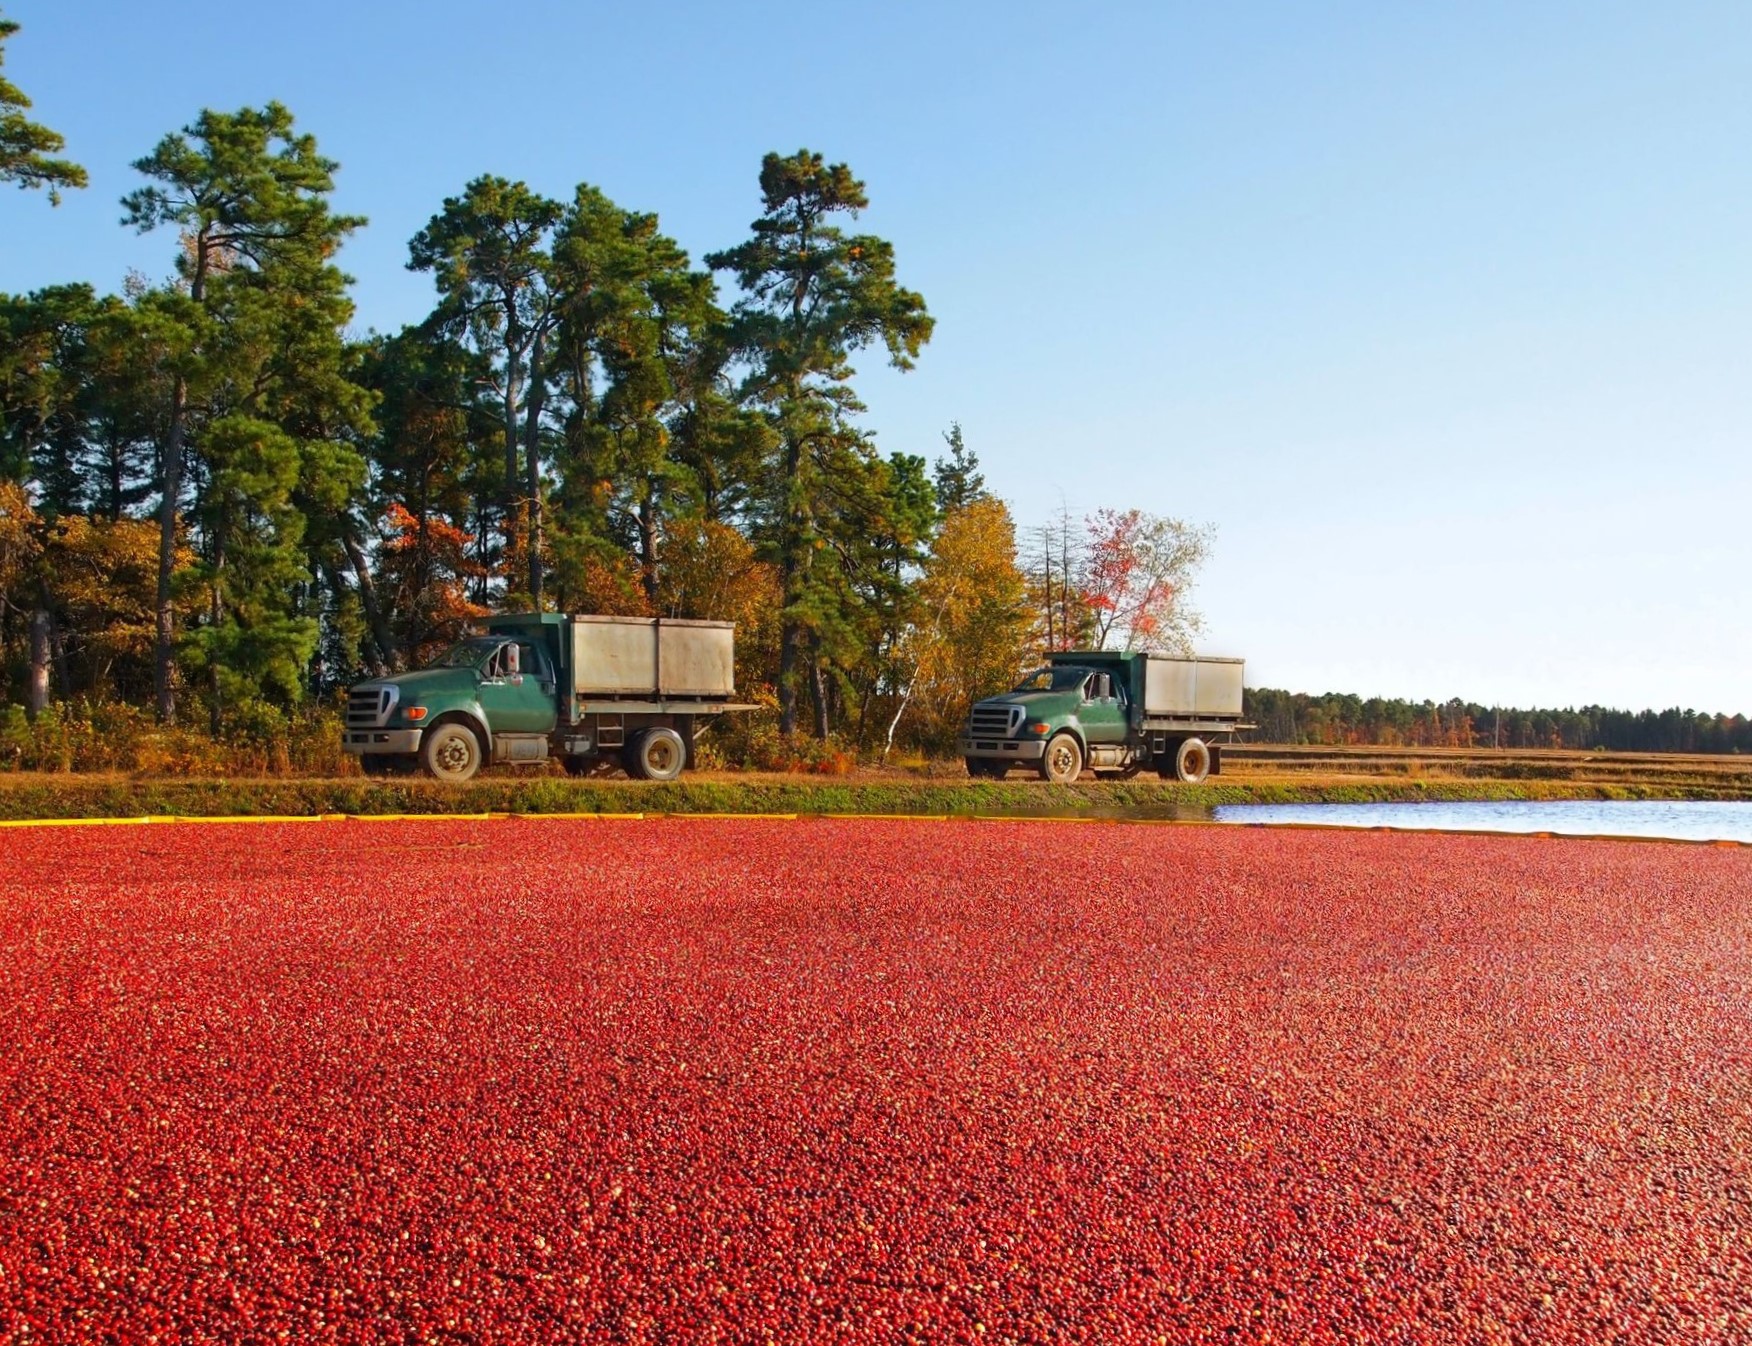 New Jersey ranks in the top five nationally for total production of cranberries, bell peppers, spinach, and blueberries.